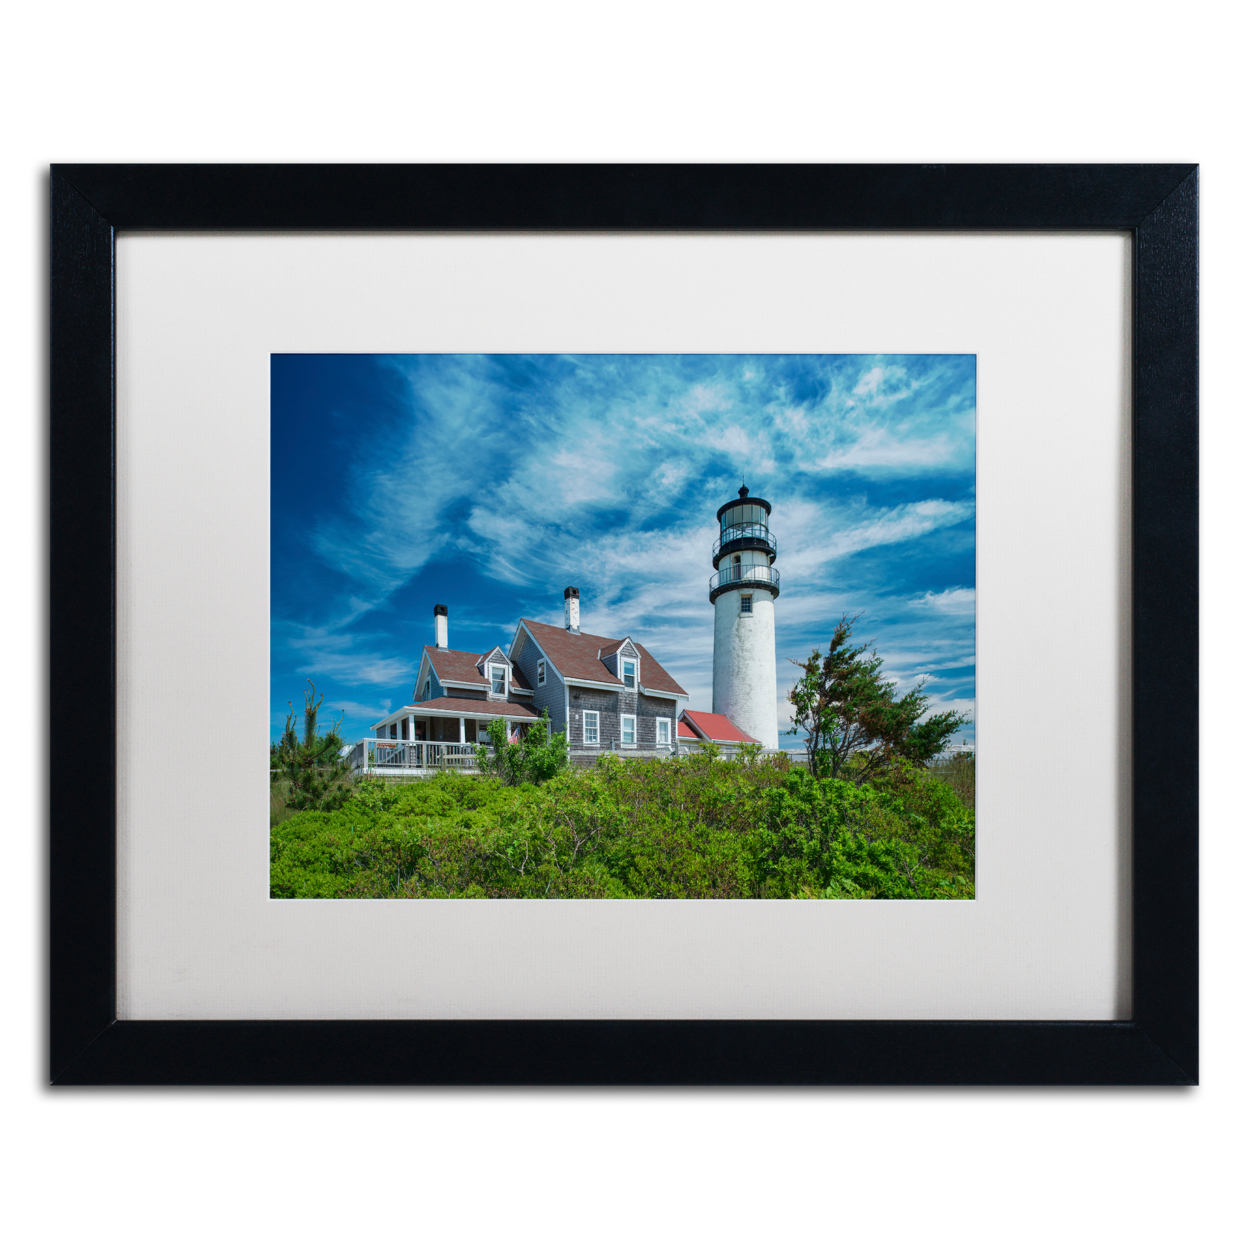 Michael Blanchette Photography 'Cape Cod Light' Black Wooden Framed Art 18 X 22 Inches